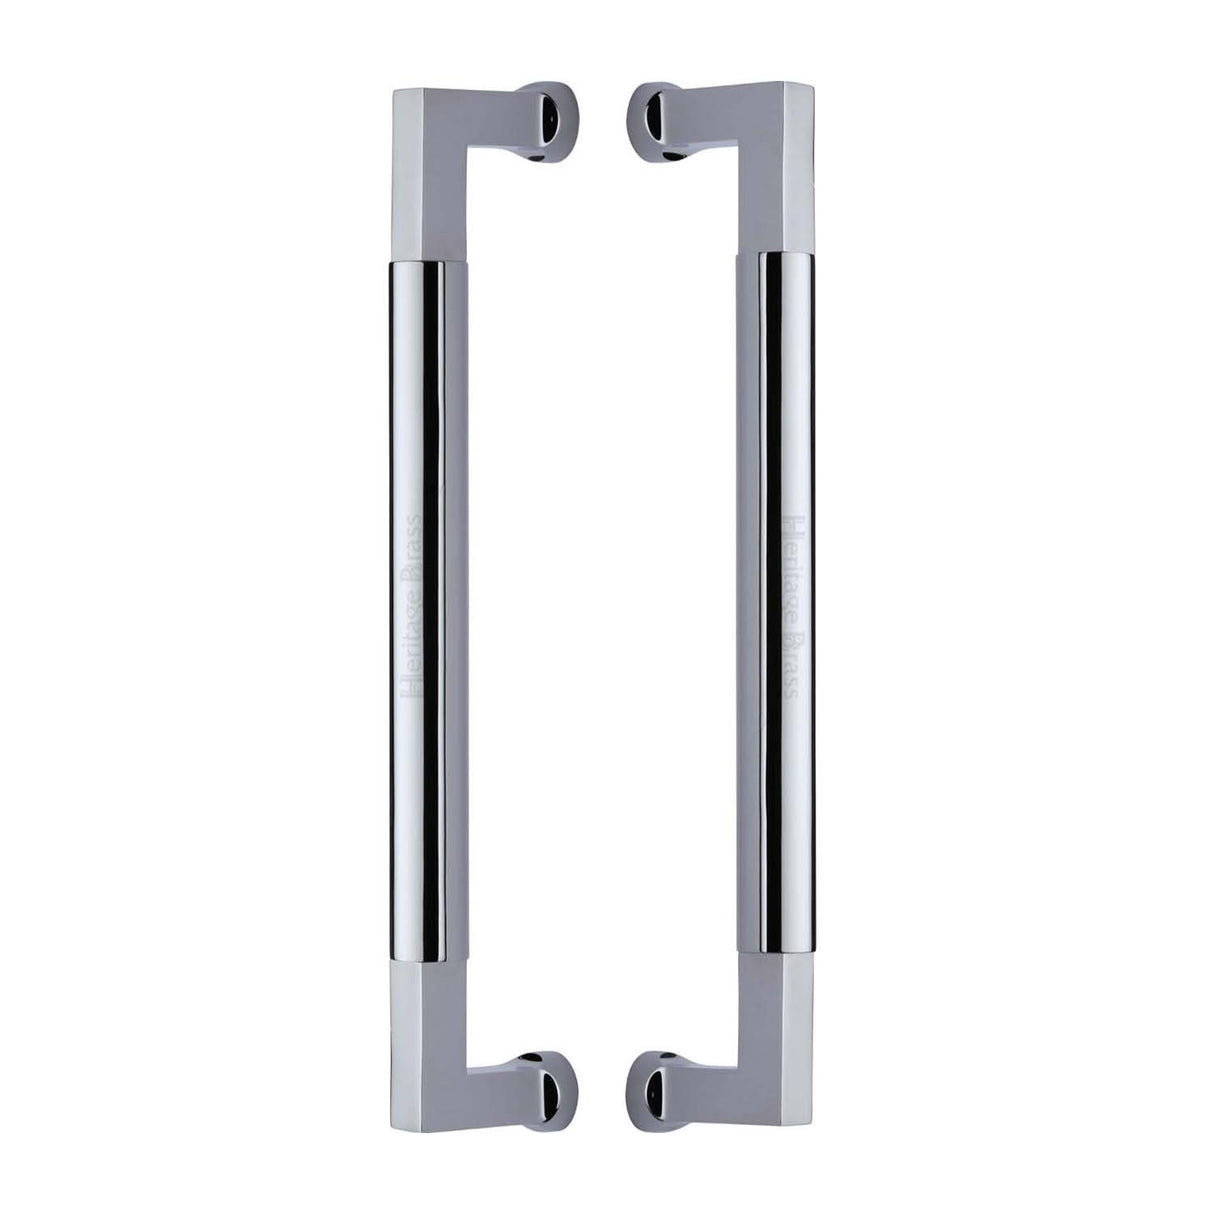 This is an image of a Heritage Brass - Door Pull Handle Bauhaus Design 330mm Polished Chrome Finish, btb1312-330-pc that is available to order from Trade Door Handles in Kendal.